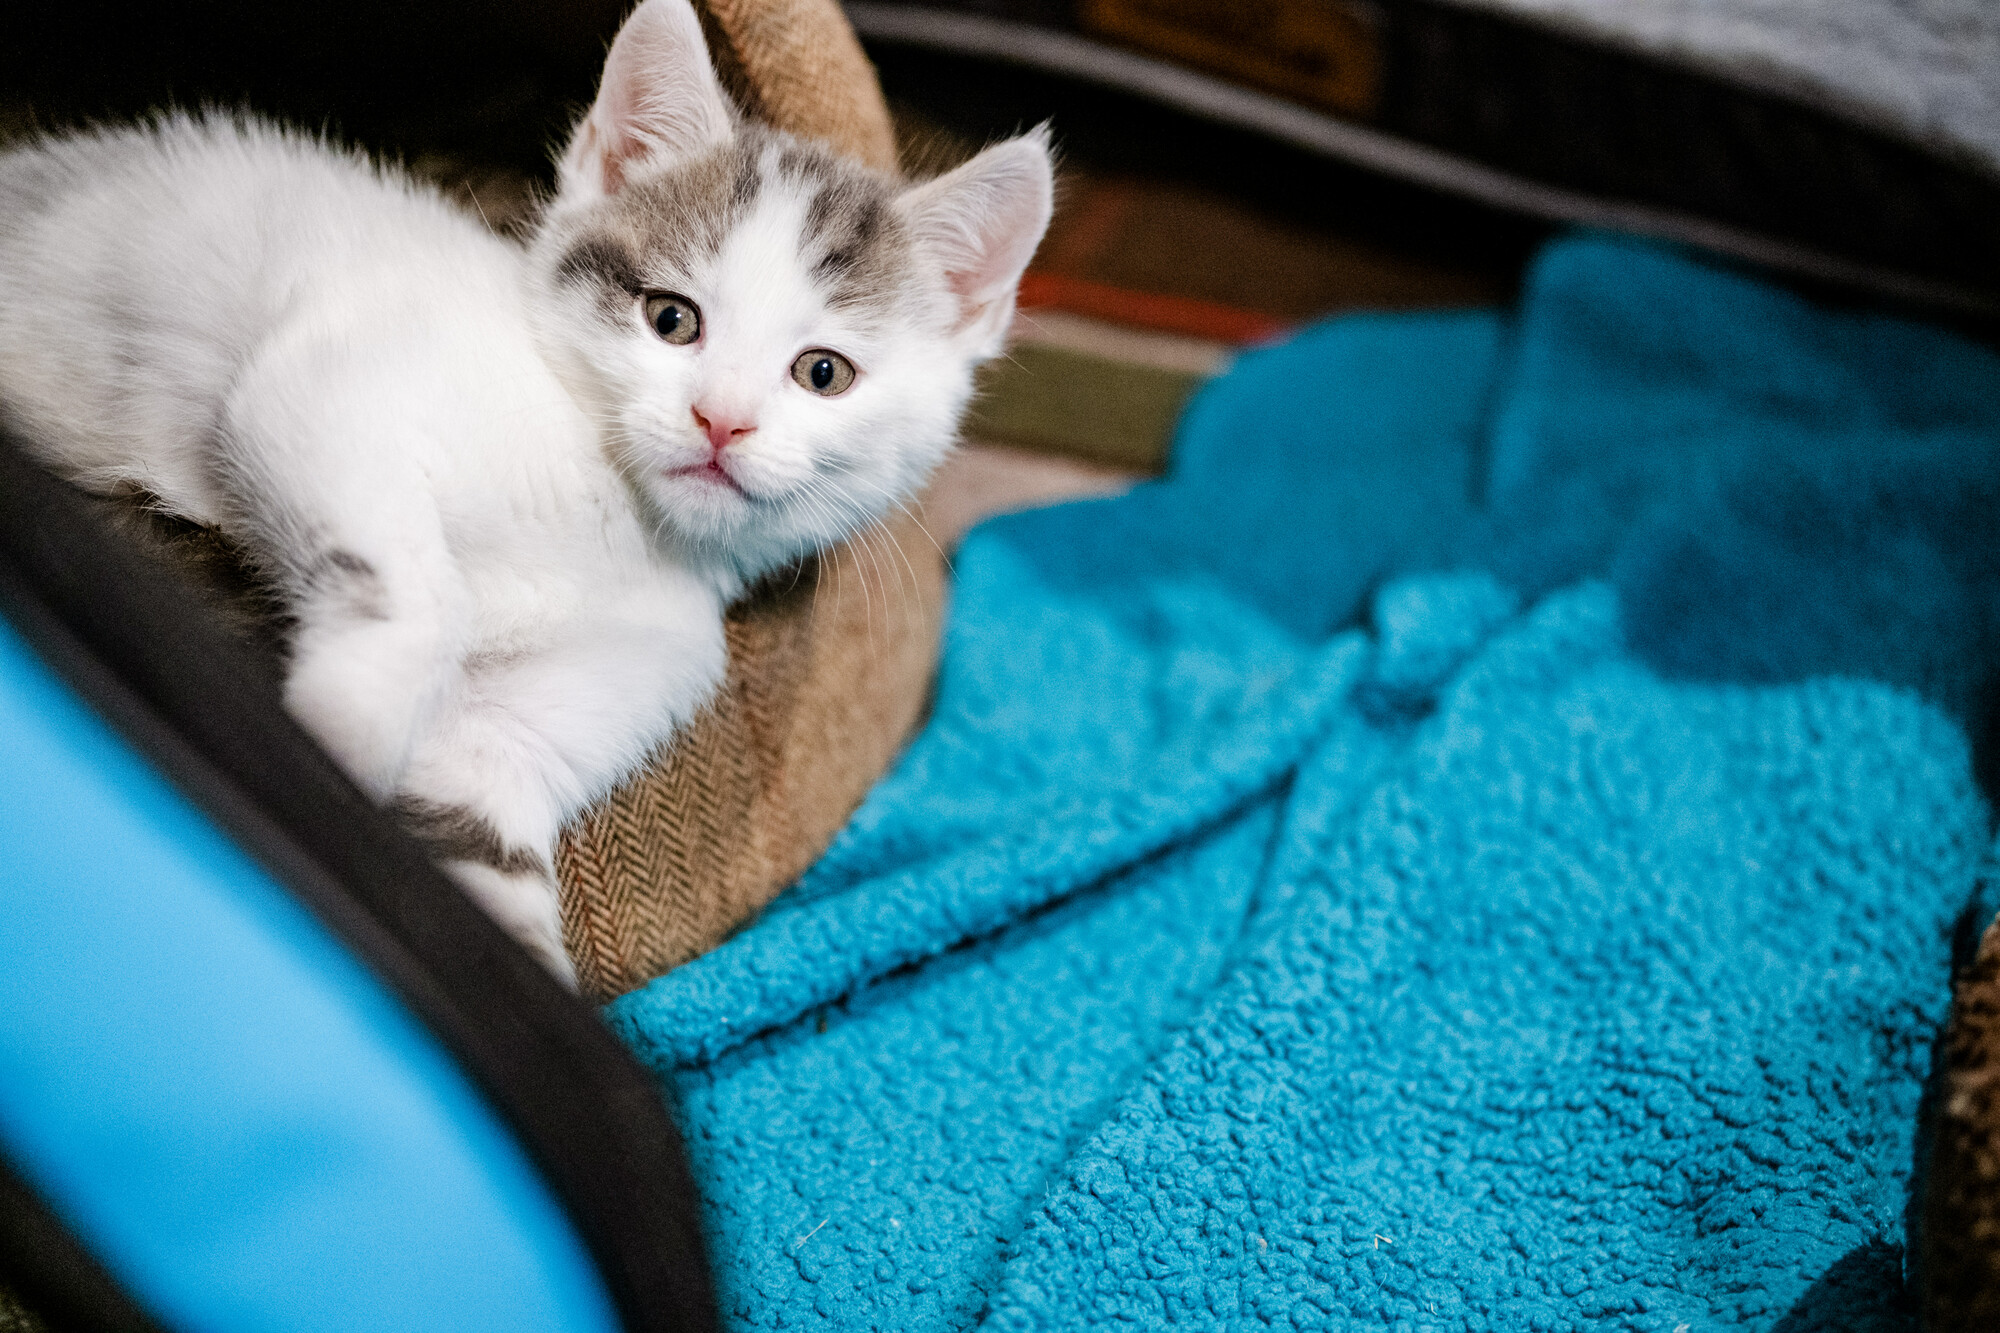 Kitten Gidget lying in her bed next to a blue towel